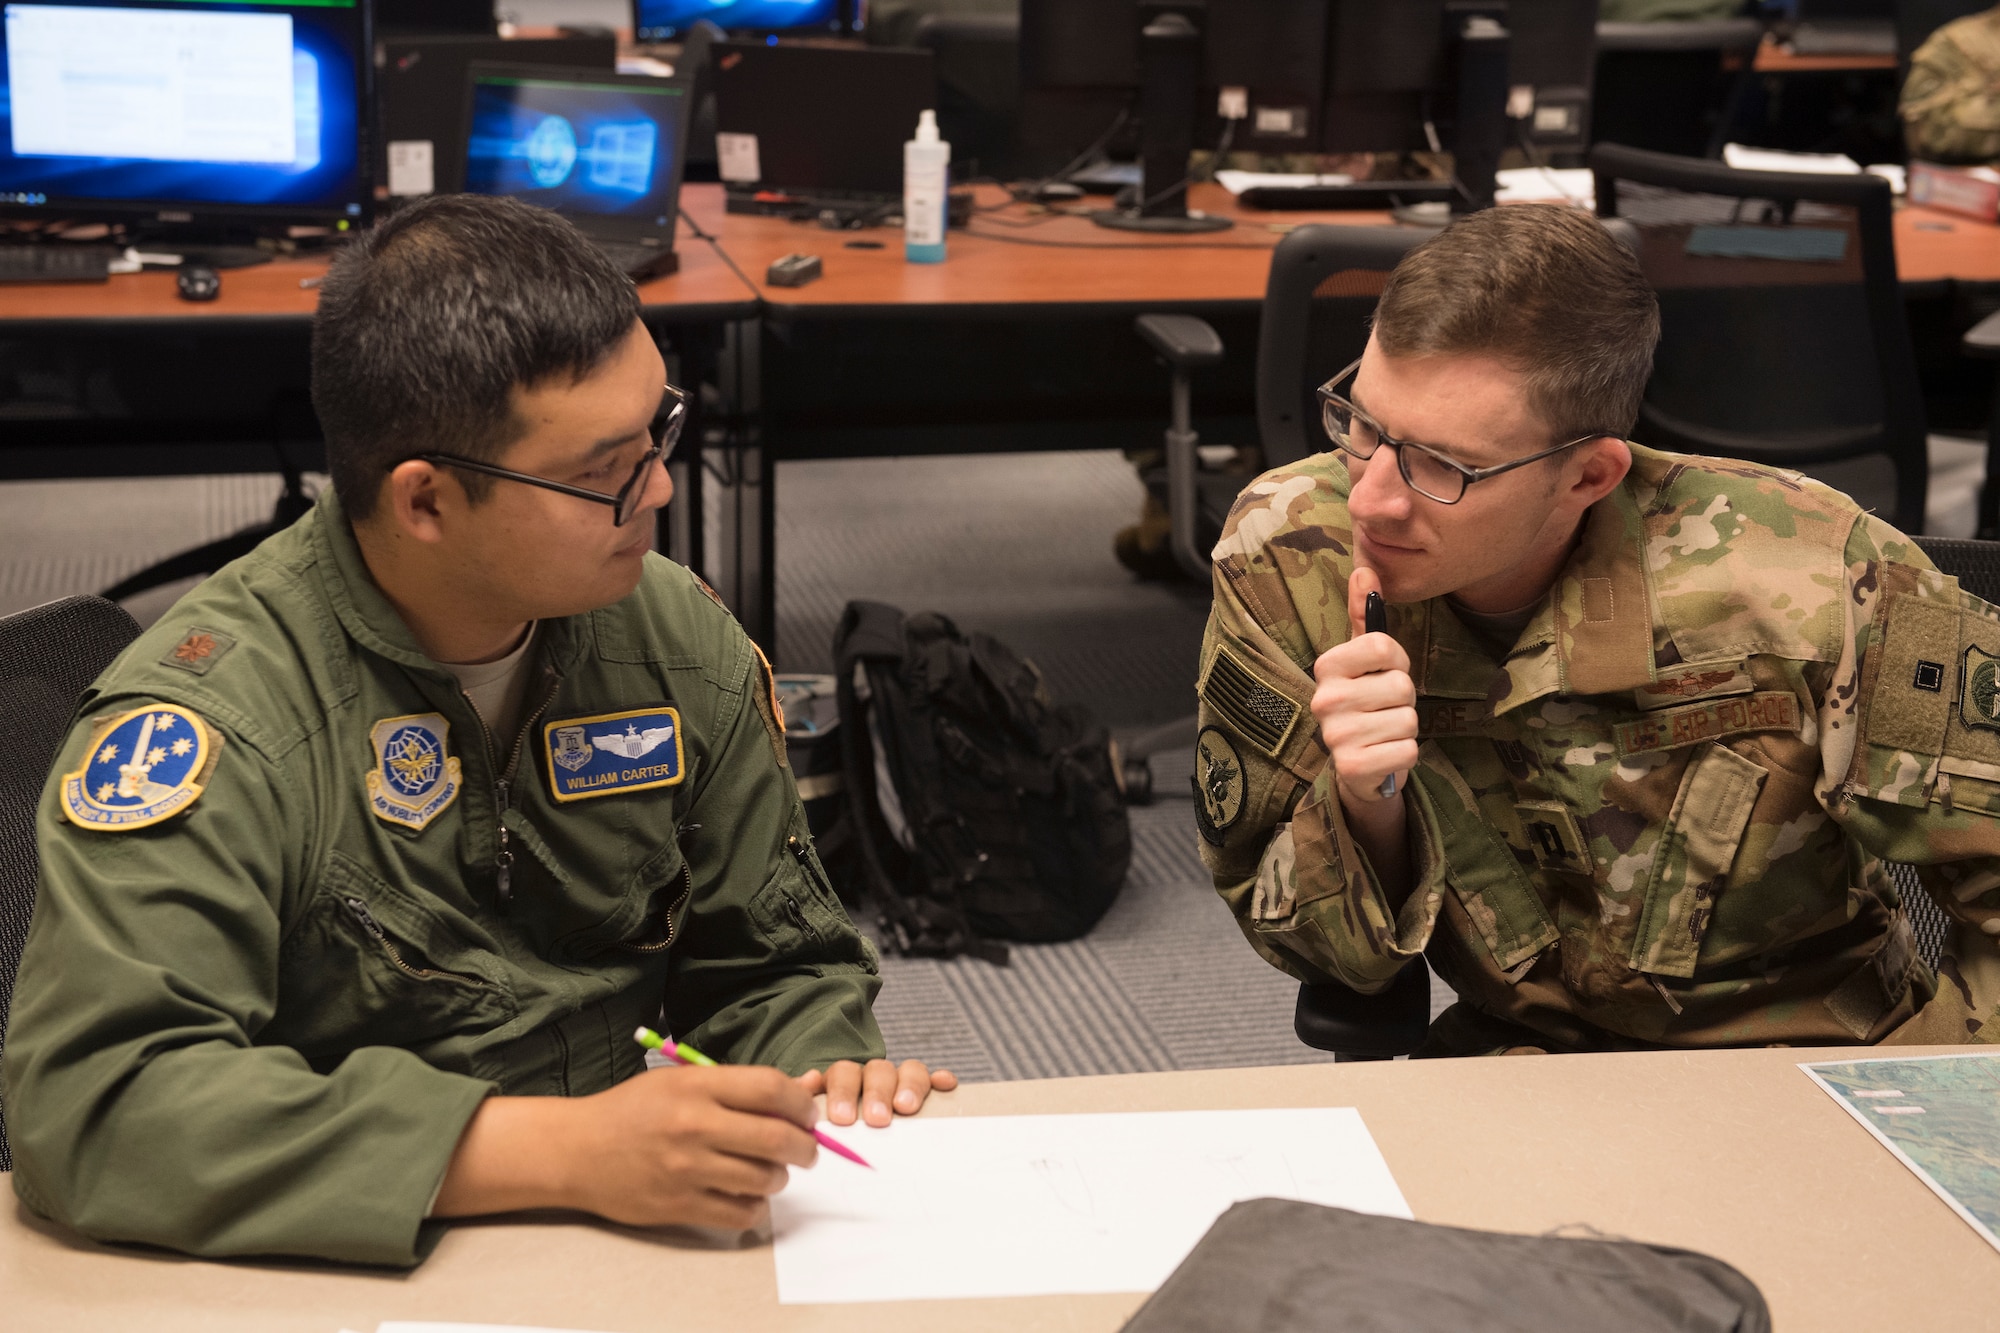 Maj. William Carter, Air Mobility Command Test and Evaluation Squadron Pilot-Directed Airdrop test Test Director, conducts preflight planning July 19, 2018, with Capt. Nick Krause, a pilot from the 8th Airlift Squadron at Joint Base Lewis-McChord, Wash.